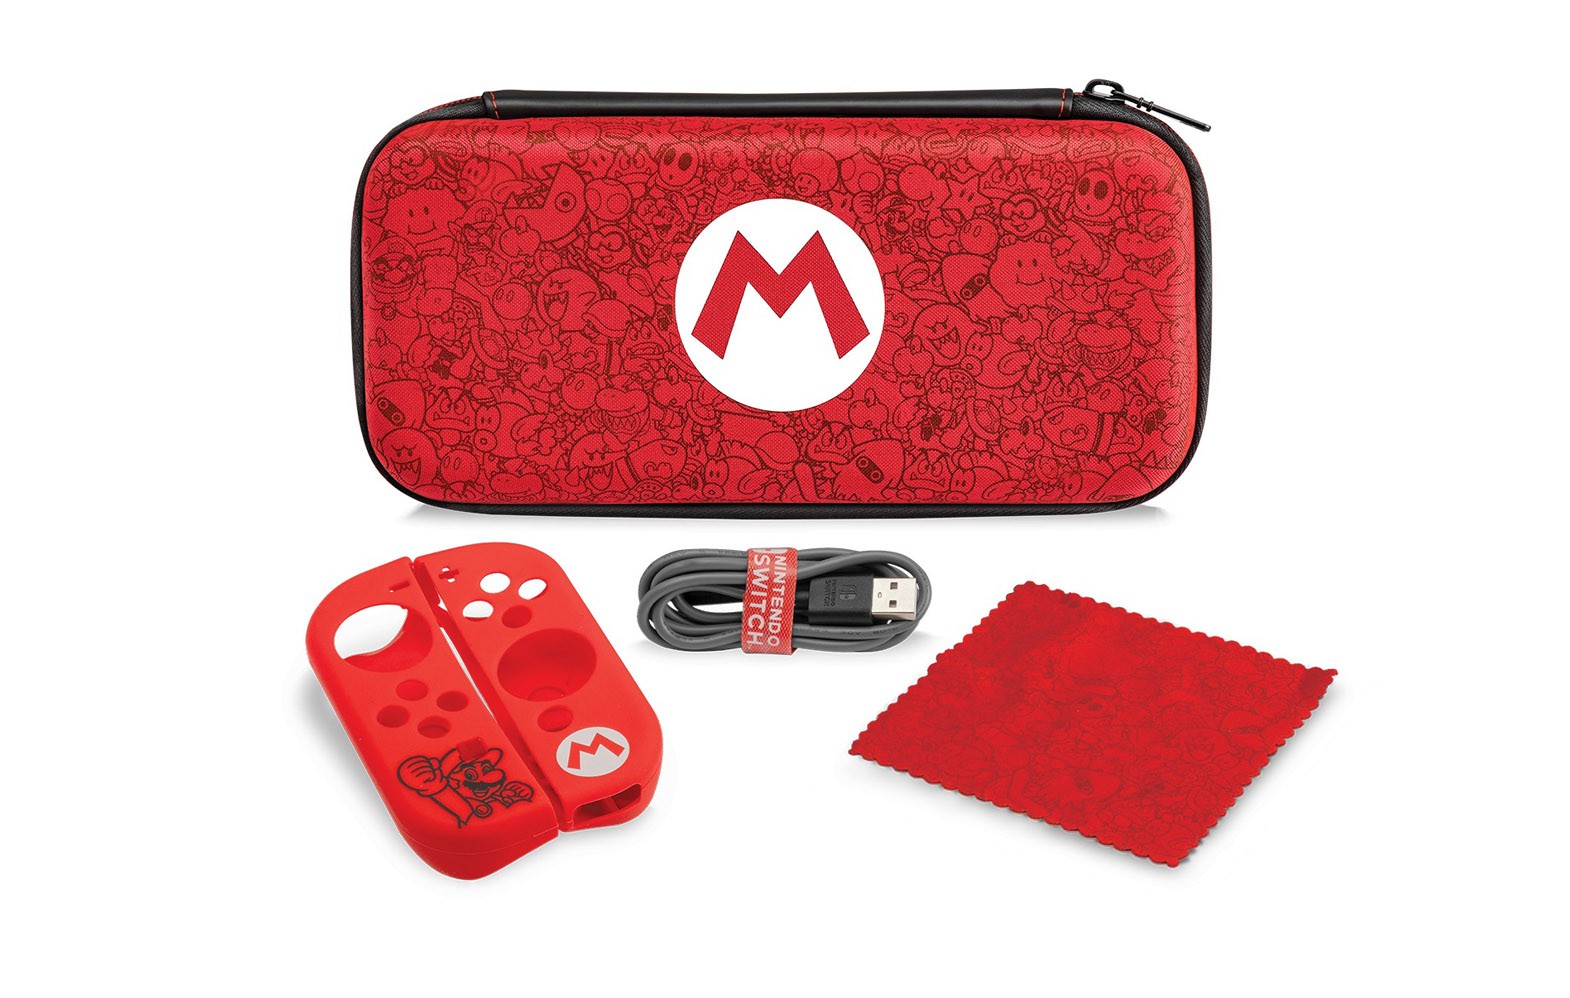 PDP Deluxe Travel Case - Mario Remix Edition For Nintendo Switch